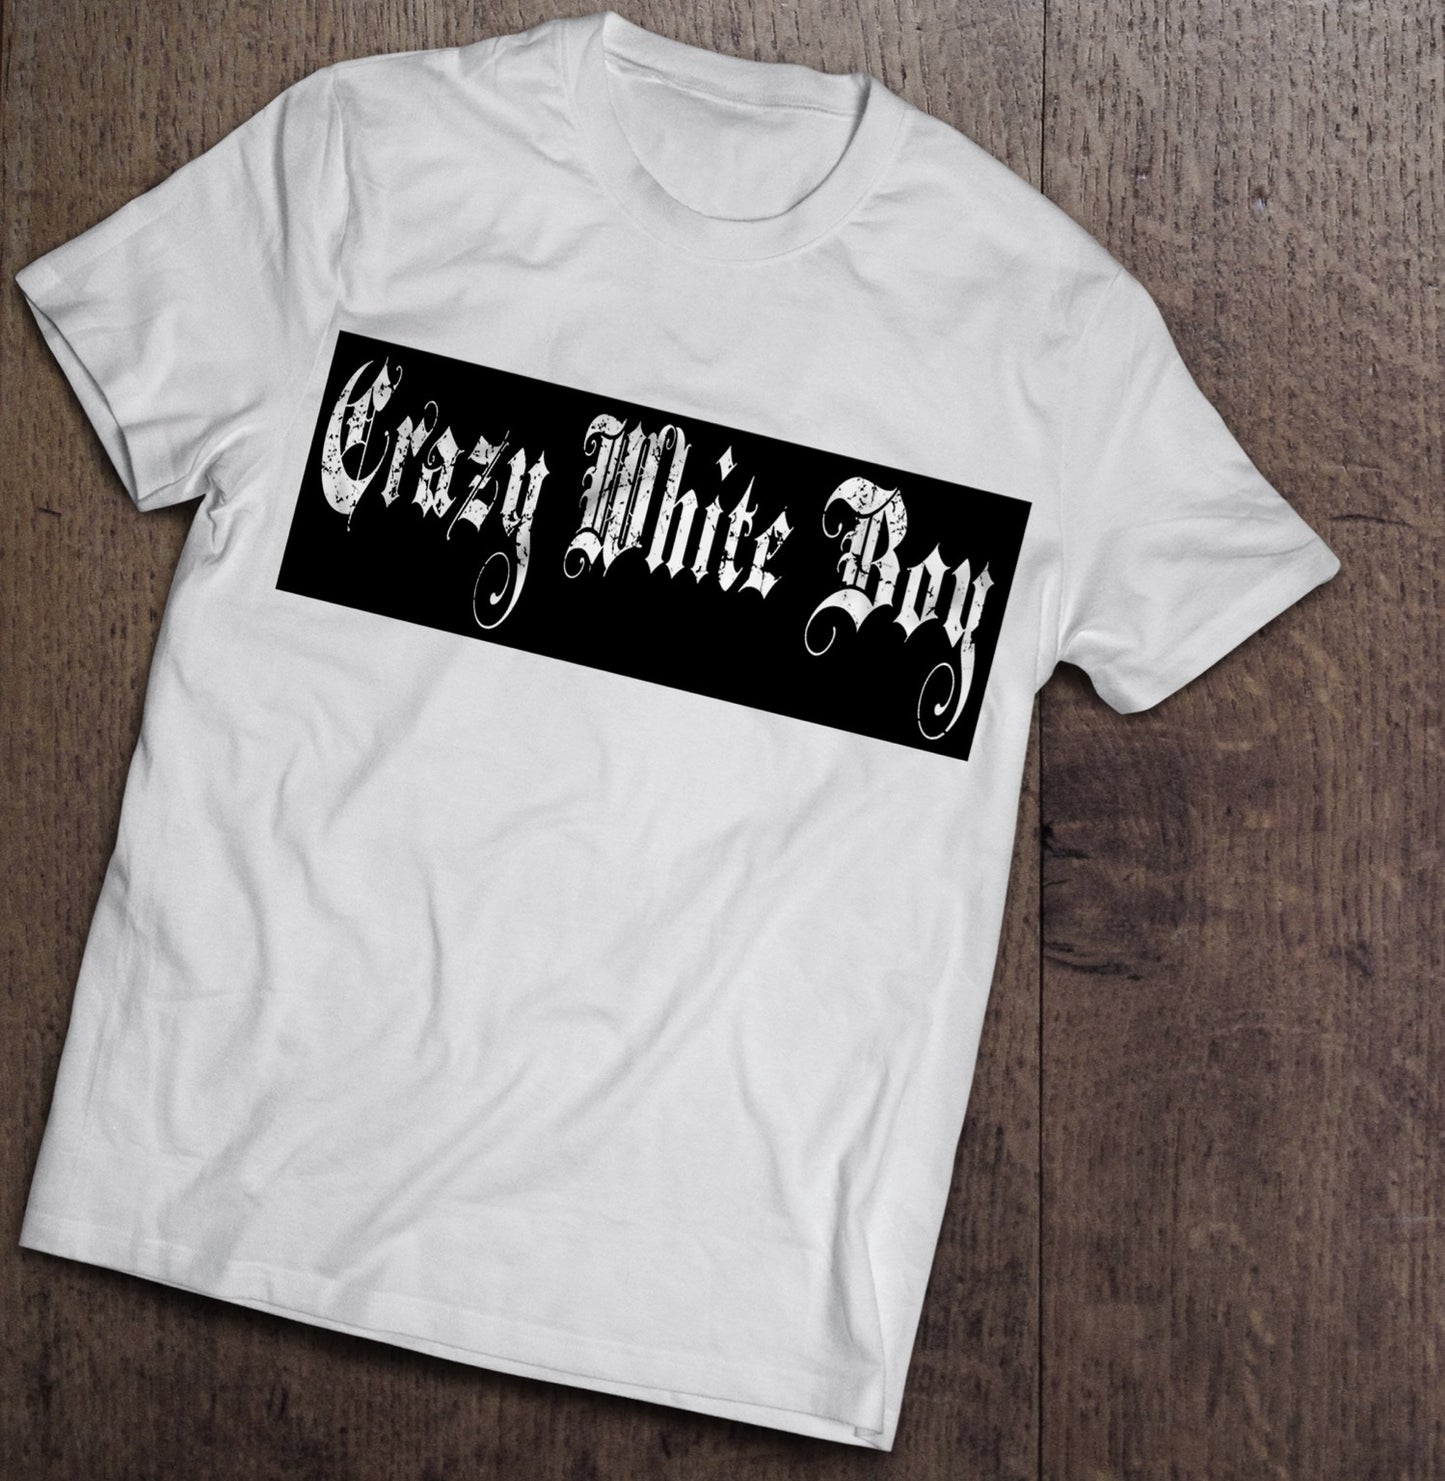 Crazy White Boy T-Shirt (Old English) *SUMMER CLOSE OUT SALE*